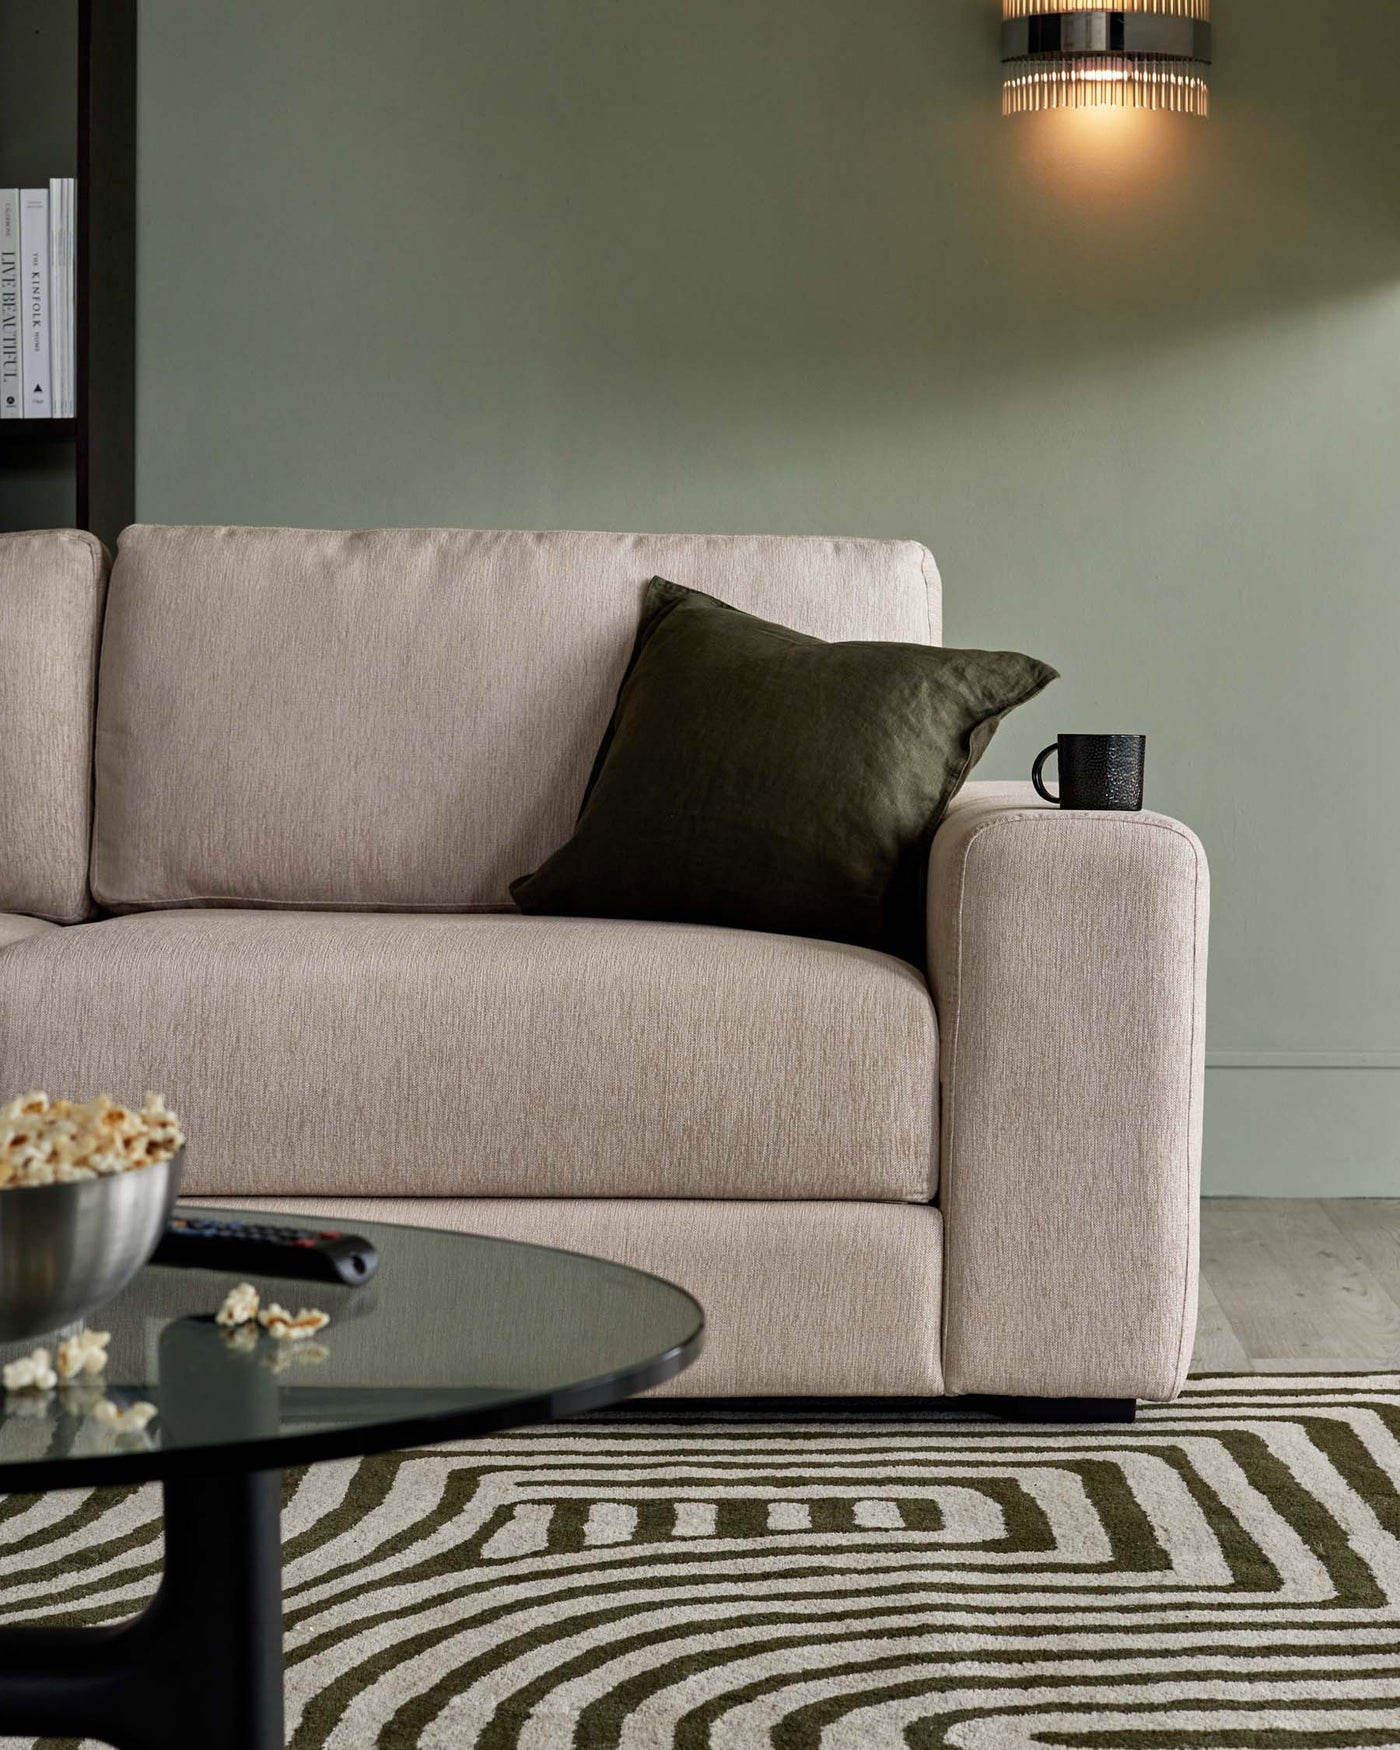 Beige upholstered modern sofa with clean lines and a soft texture, accompanied by a dark olive green decorative pillow. A sleek black round coffee table with a reflective surface sits on a patterned grey and white area rug, completing the contemporary living space aesthetic. A stylish pendant light with a warm glow hangs in the background, enhancing the ambiance.